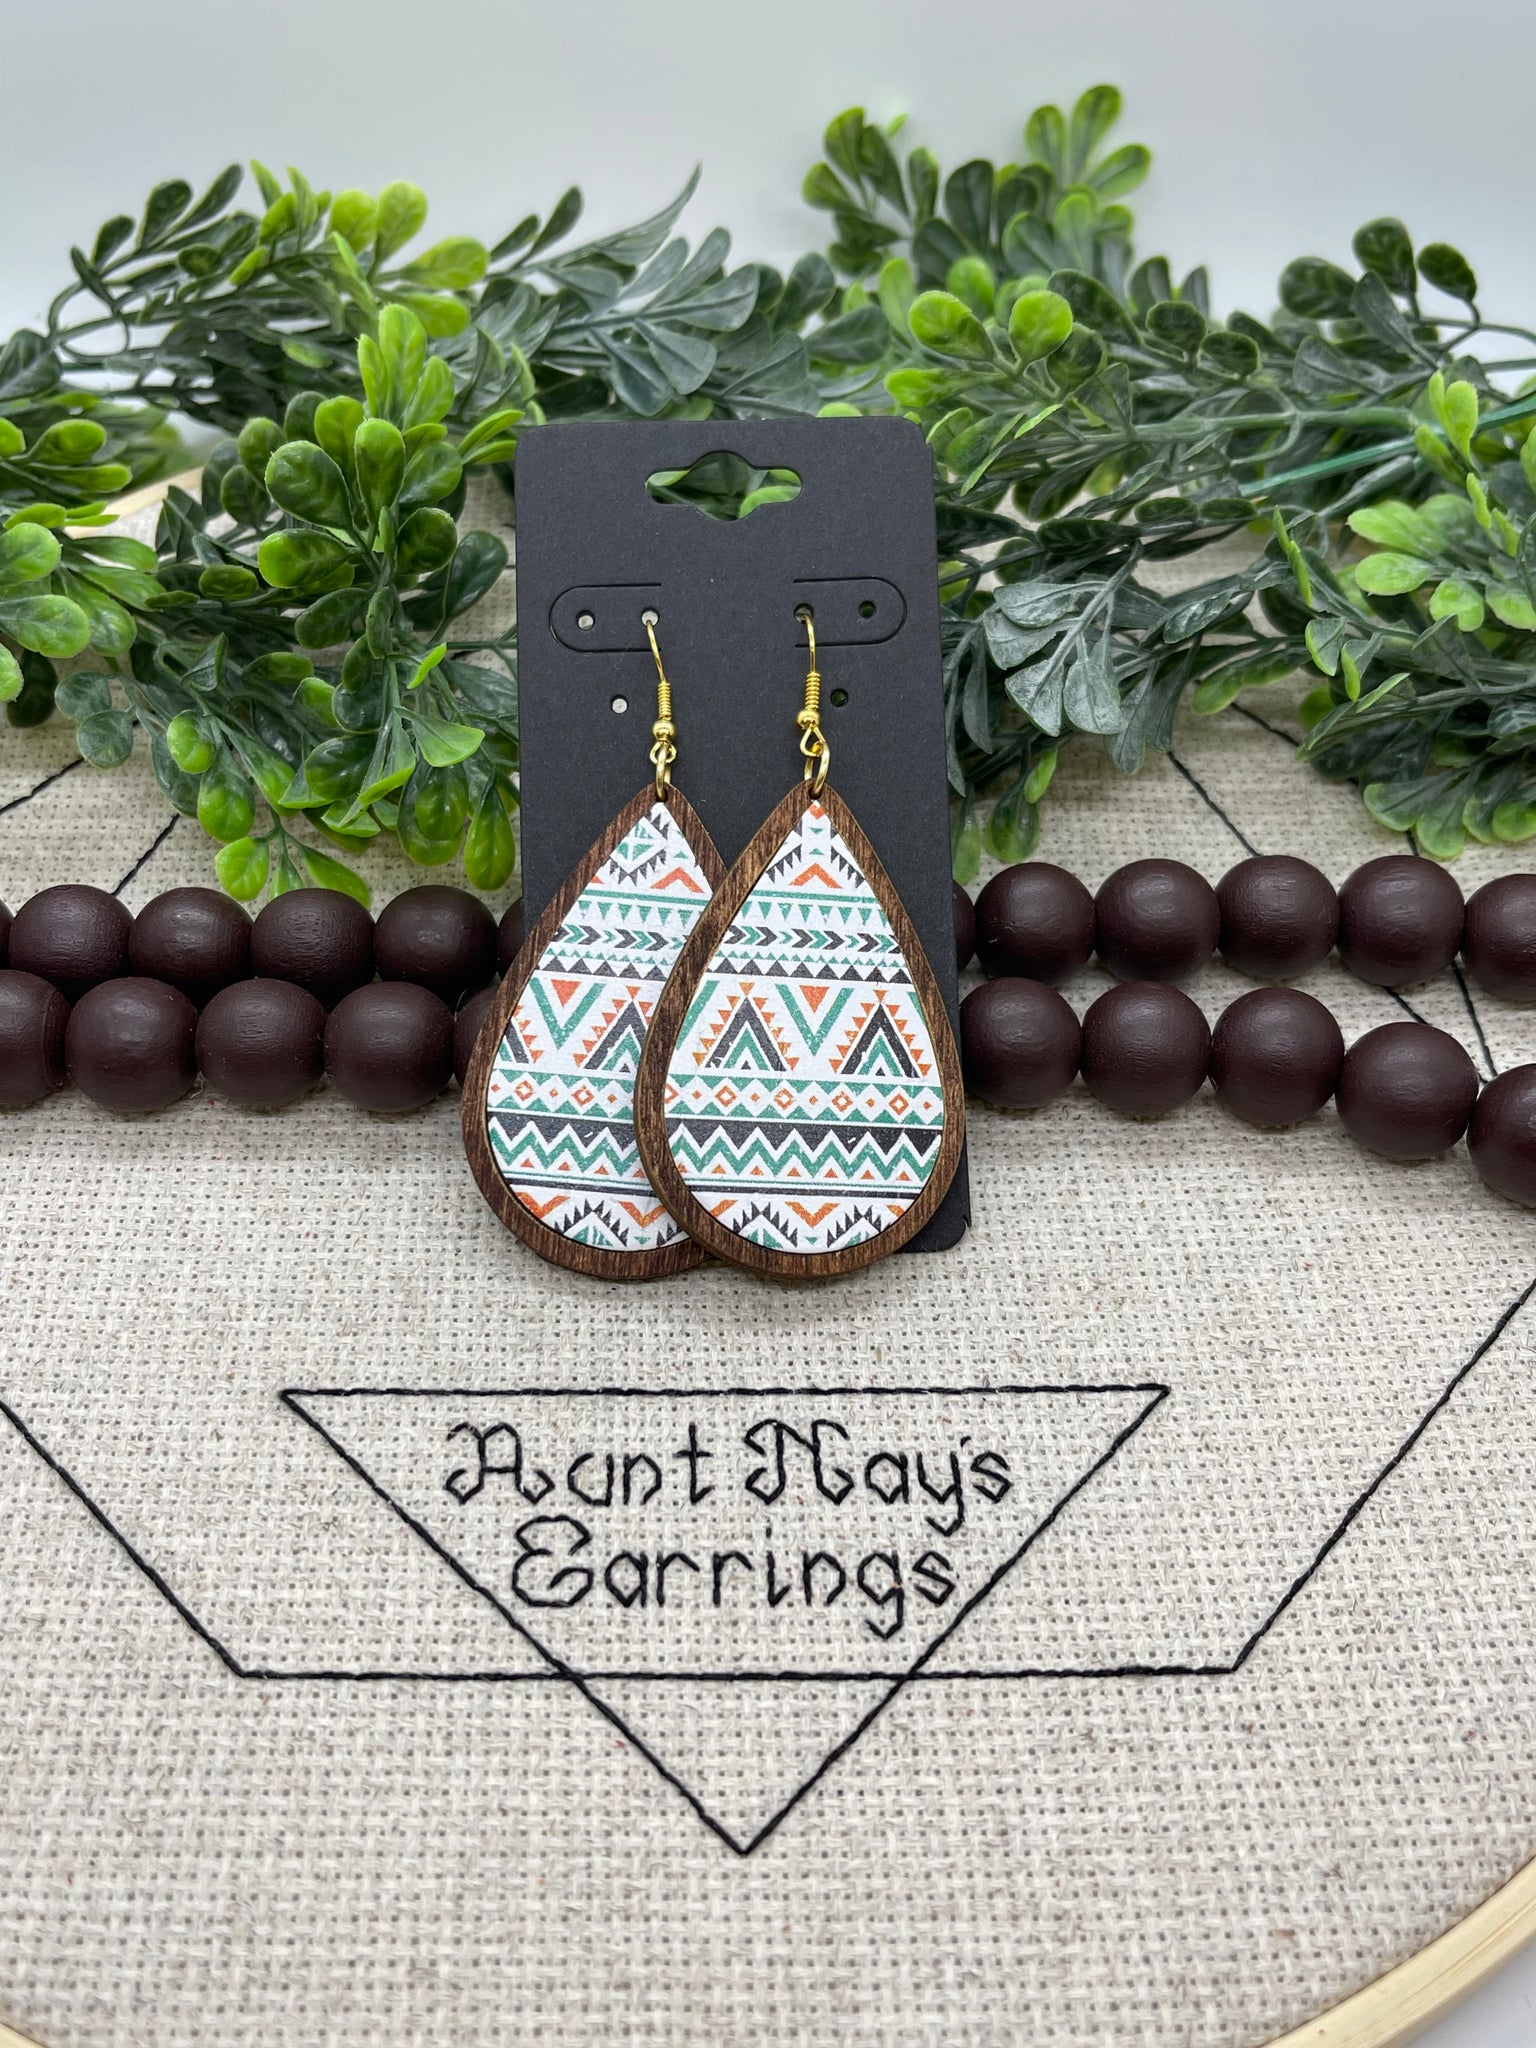 Turquoise Triangle Print Cork on Leather in Wood Bezels Earrings